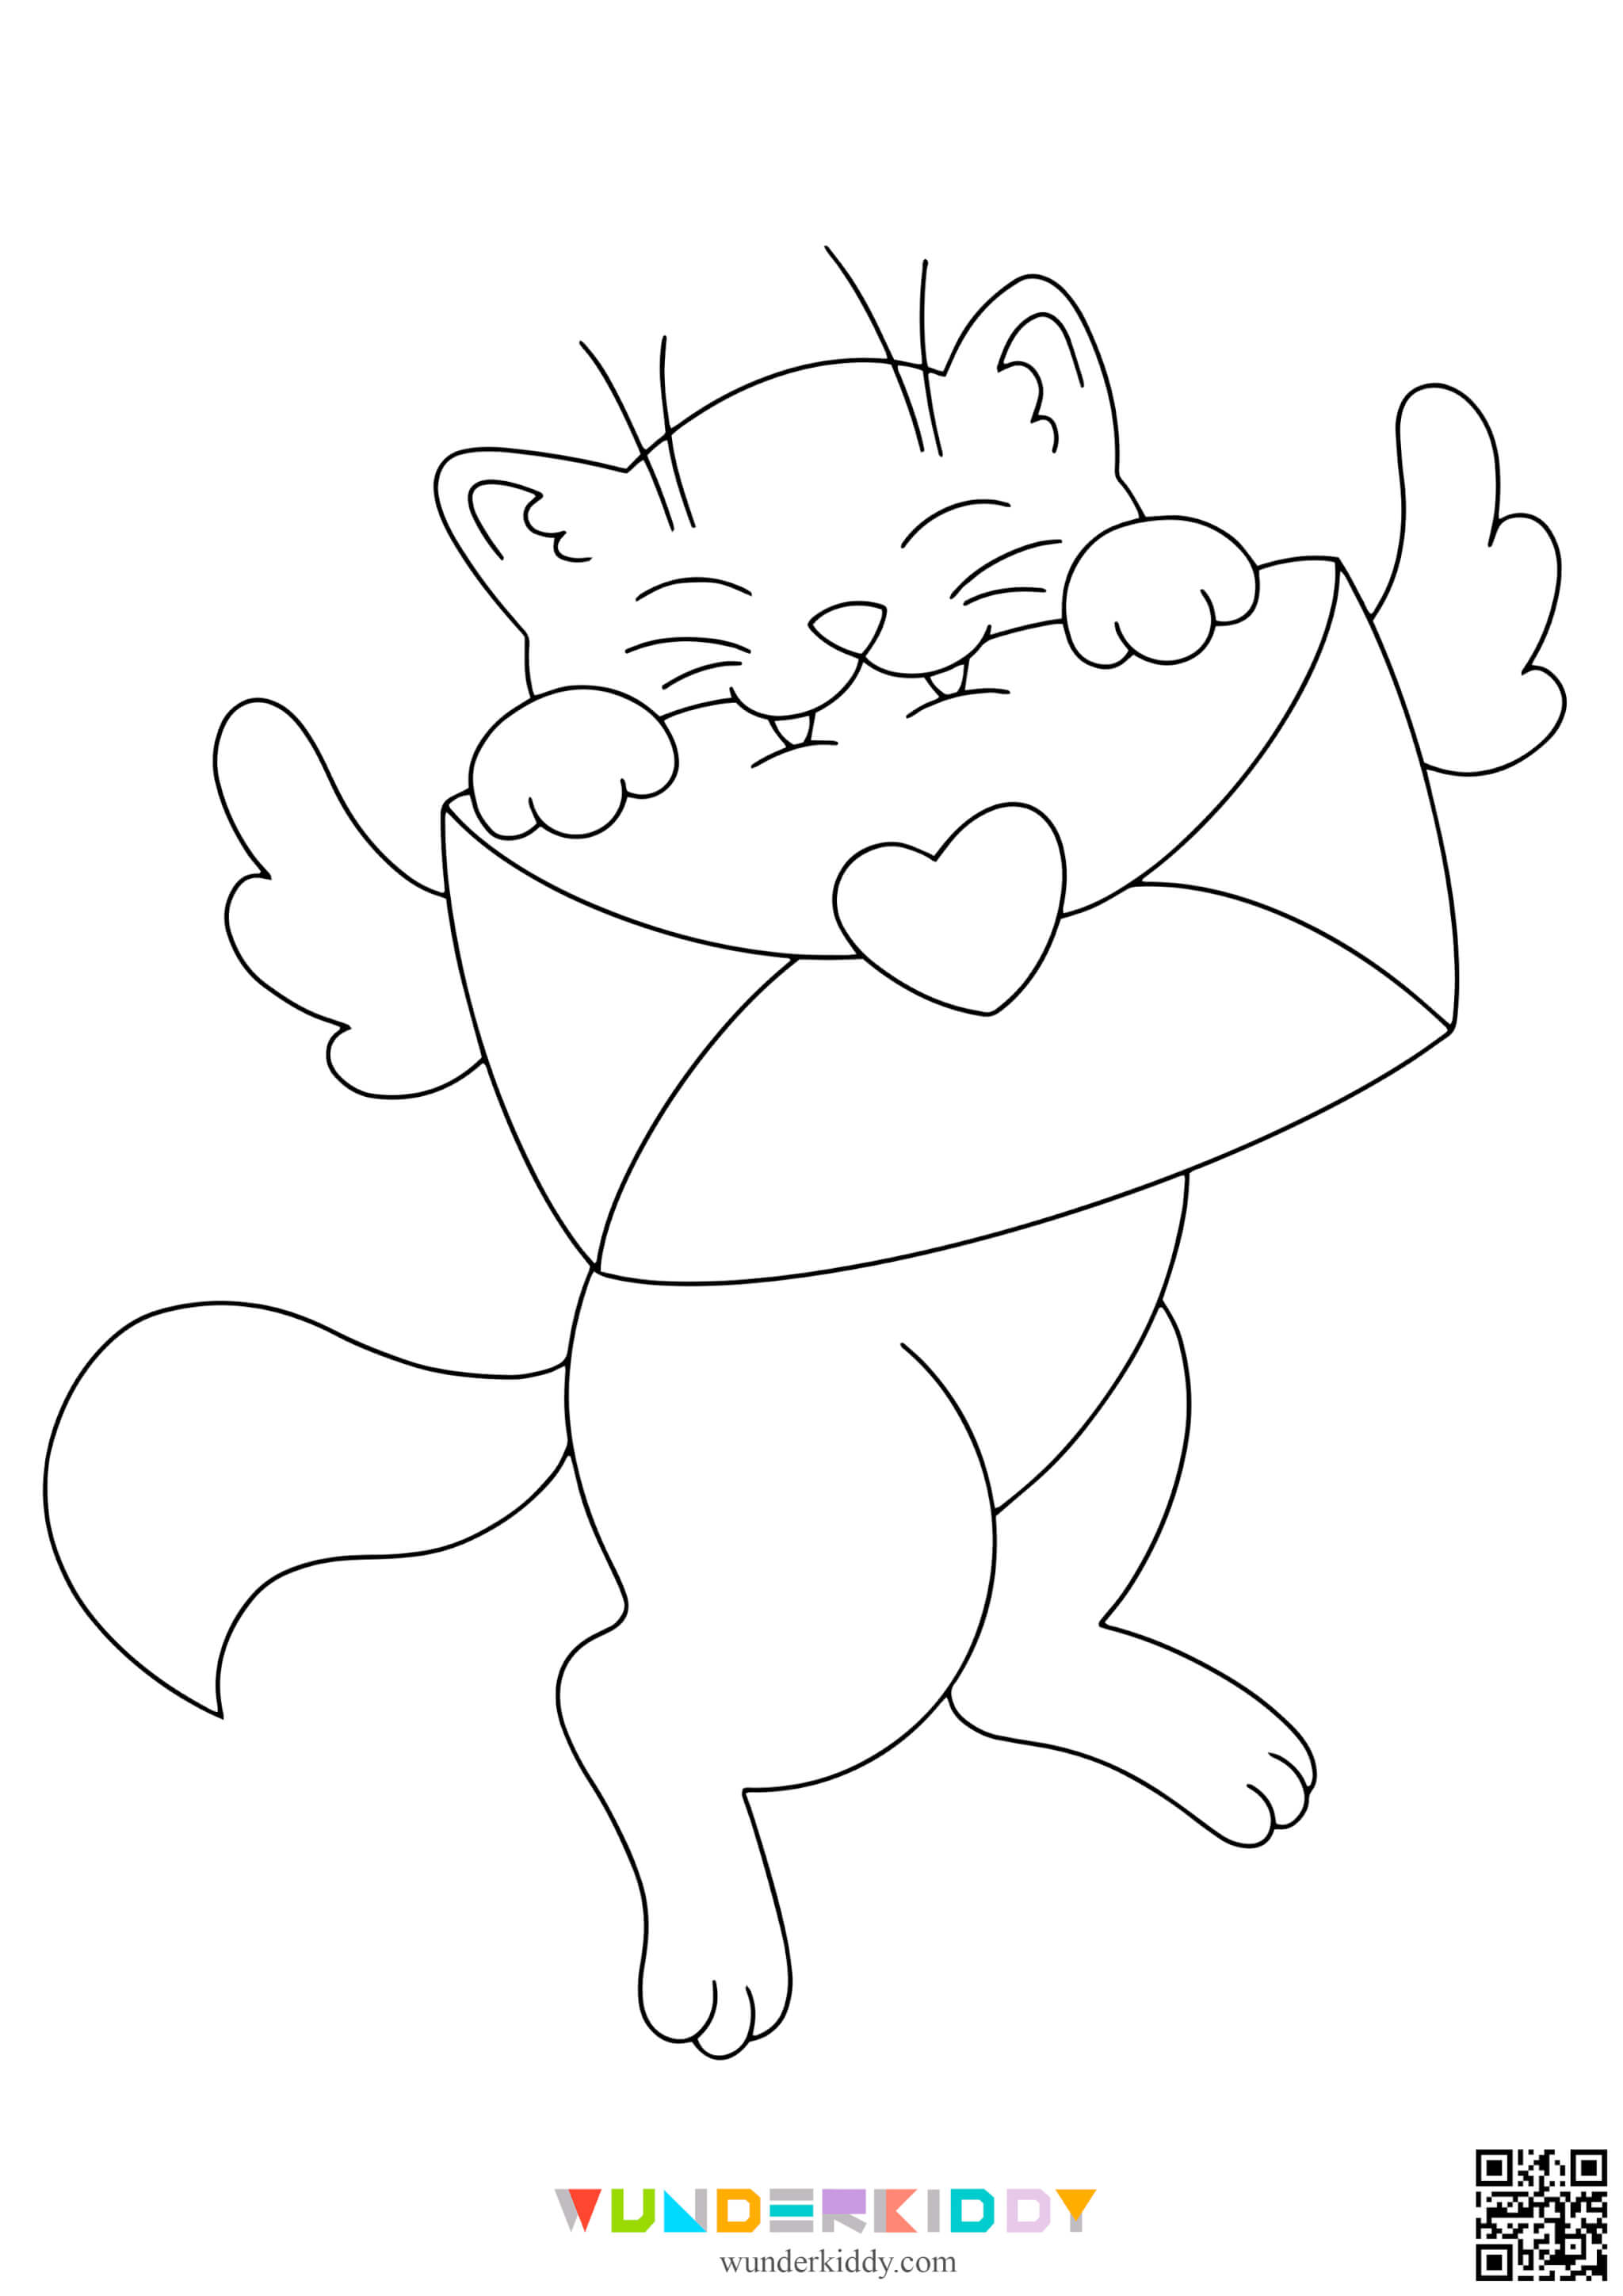 Valentines Coloring Pages - Image 4